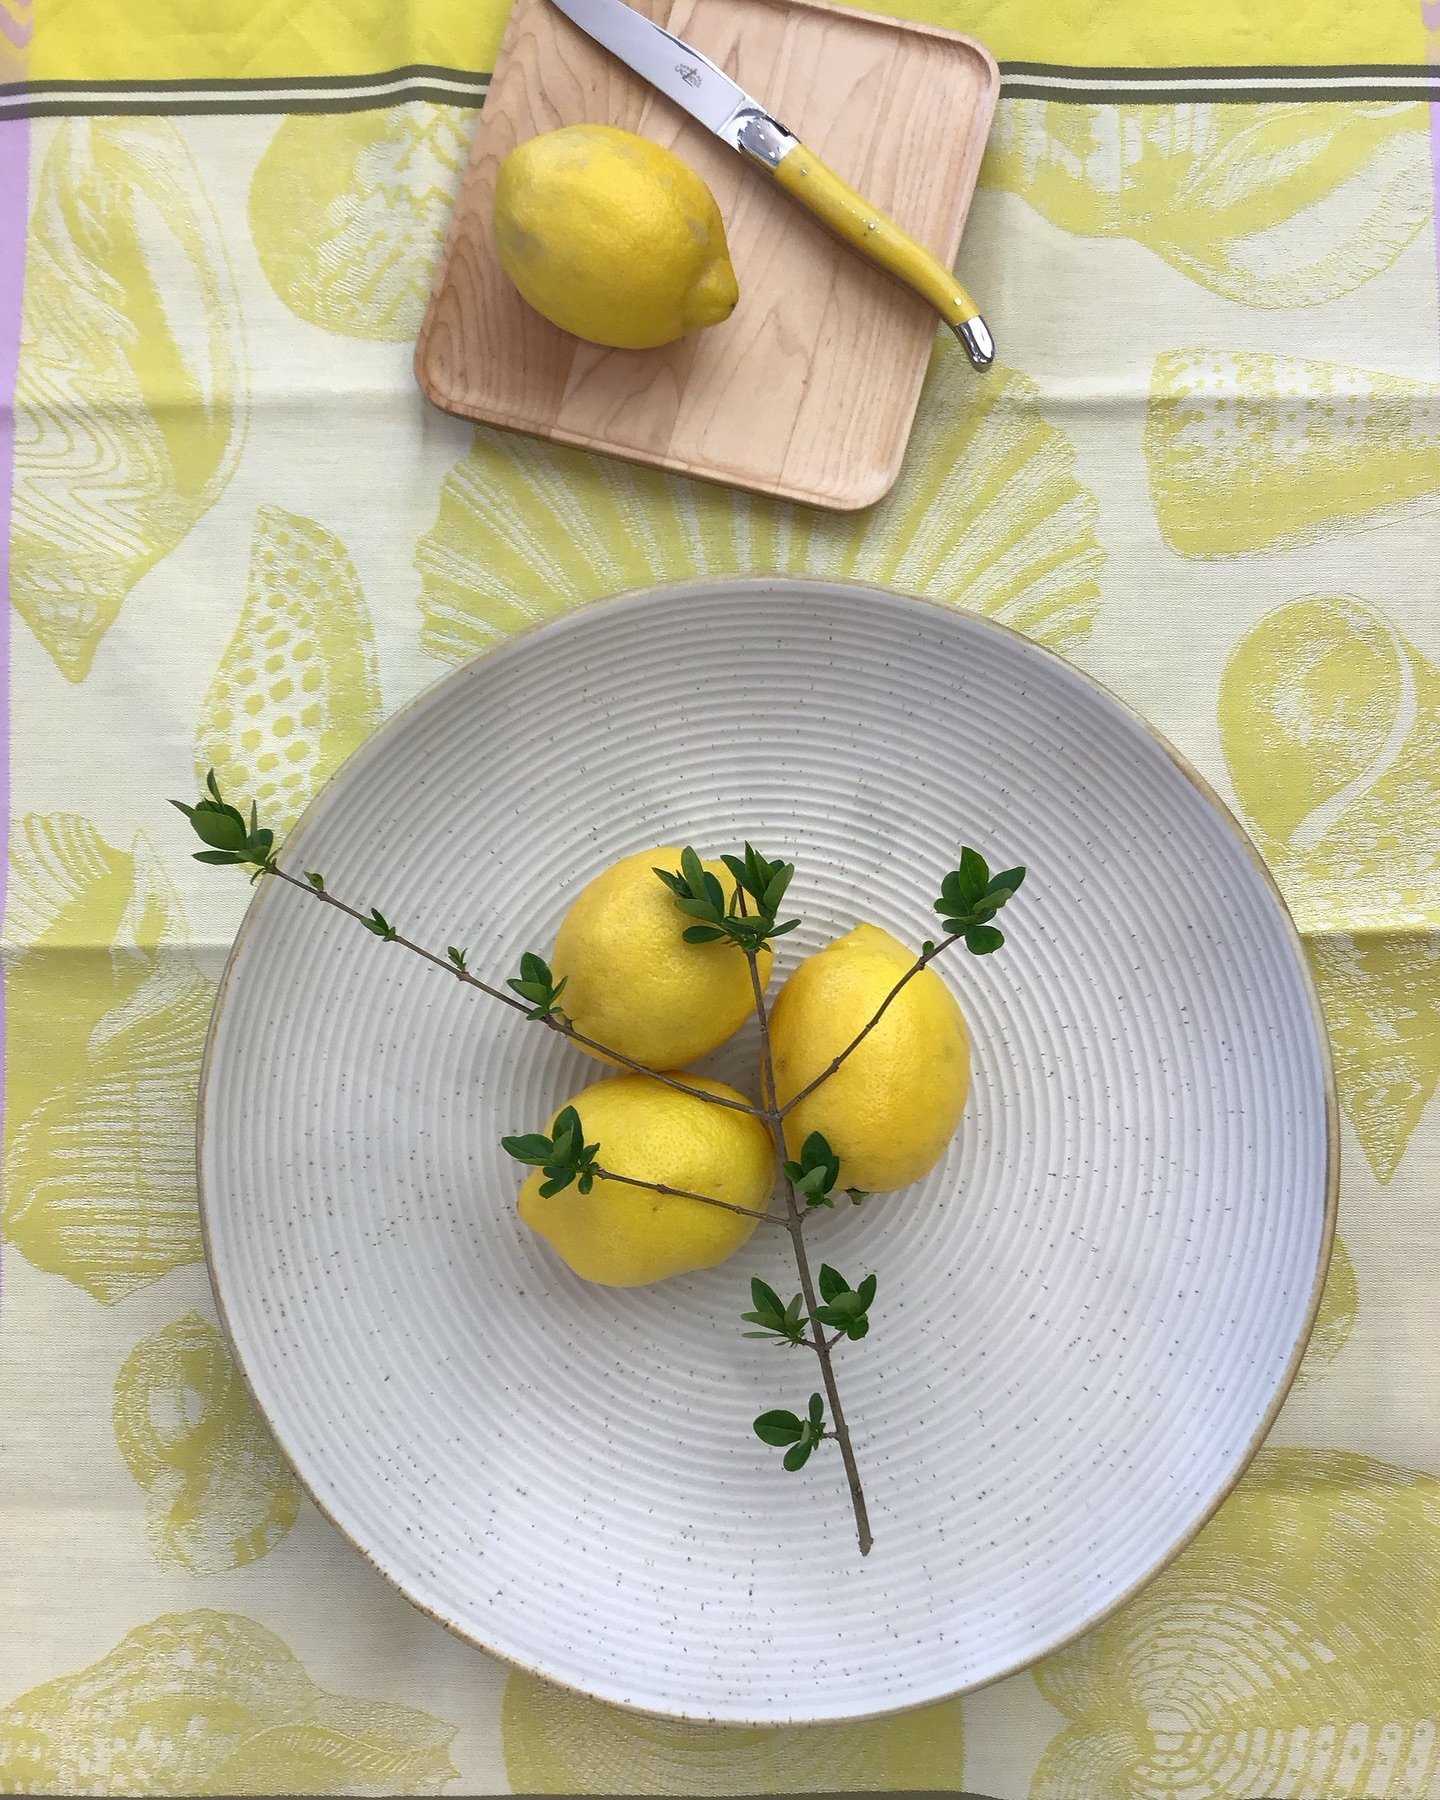 Japandi&rsquo; with lemon styles your table with a calming organic feel.  It&rsquo;s real!..Japanese blended with Scandinavian design.
.
.
#latest #fresh #japandistyle #tabletop #lemon #hamptons #lovemyjob